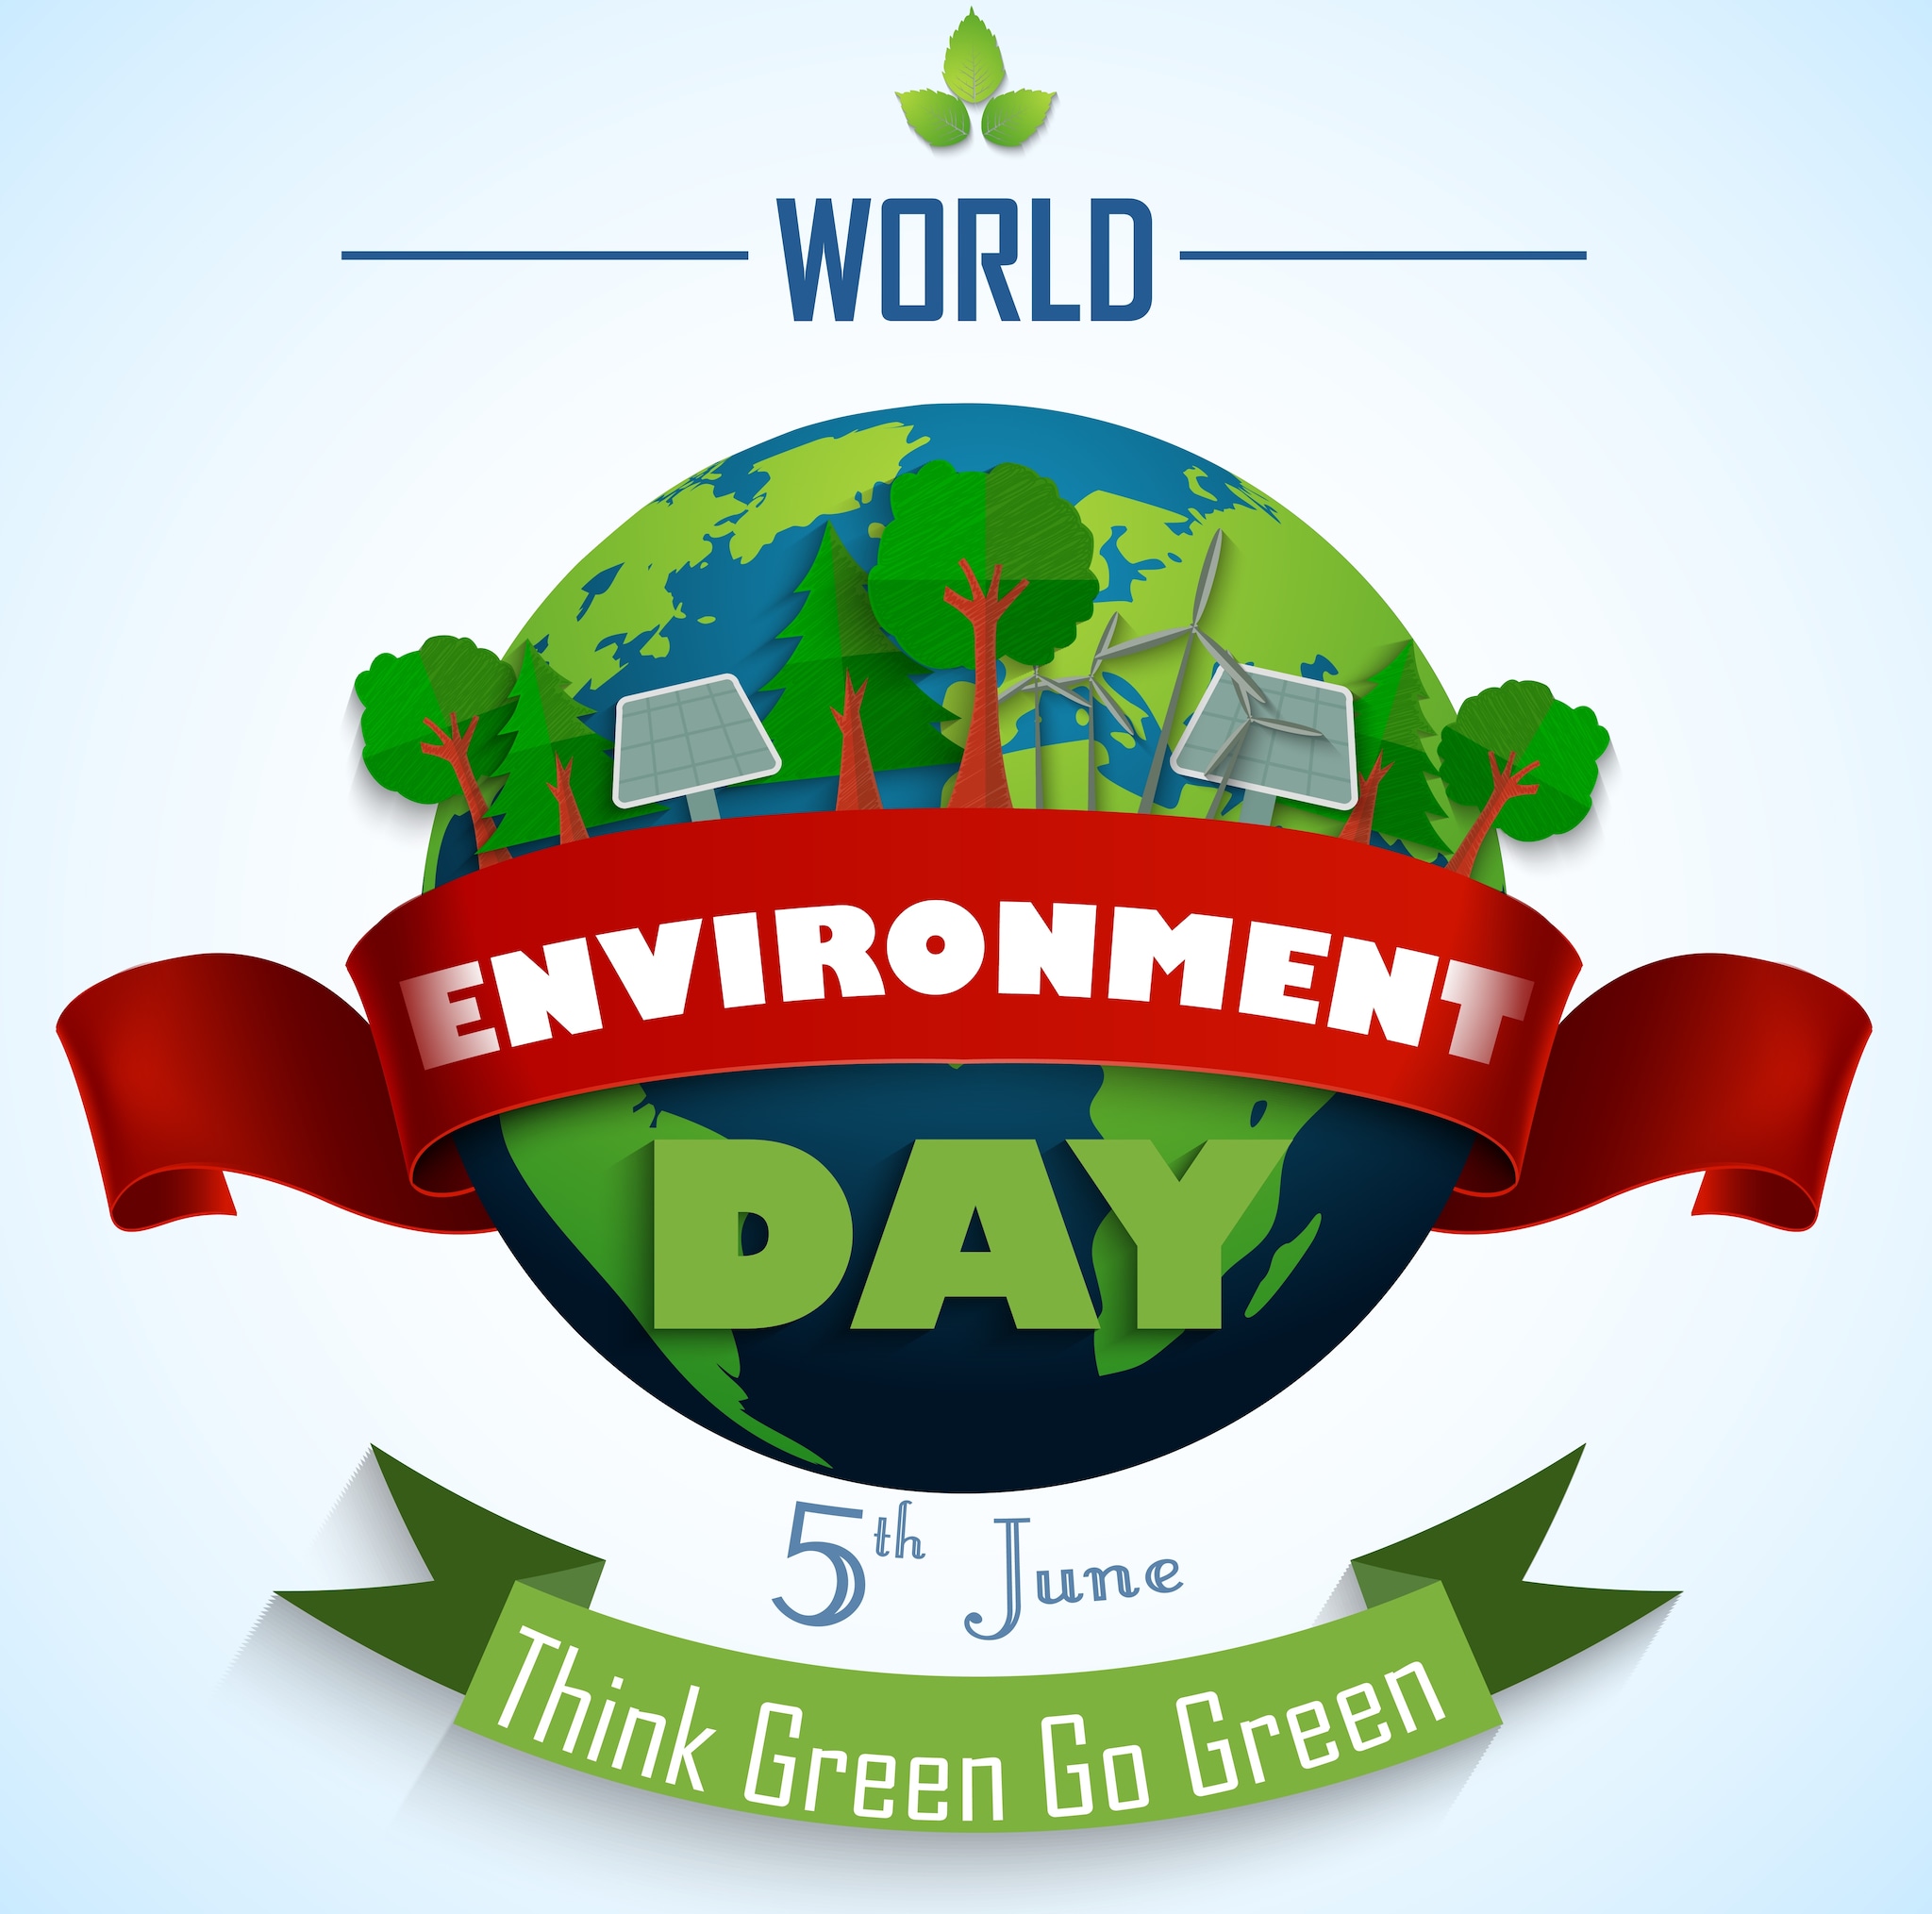 World Environment Day 2022 Wishes: Wishes, Quotes, Messages and WhatsApp Wishes to share.  (Image: Shutterstock)